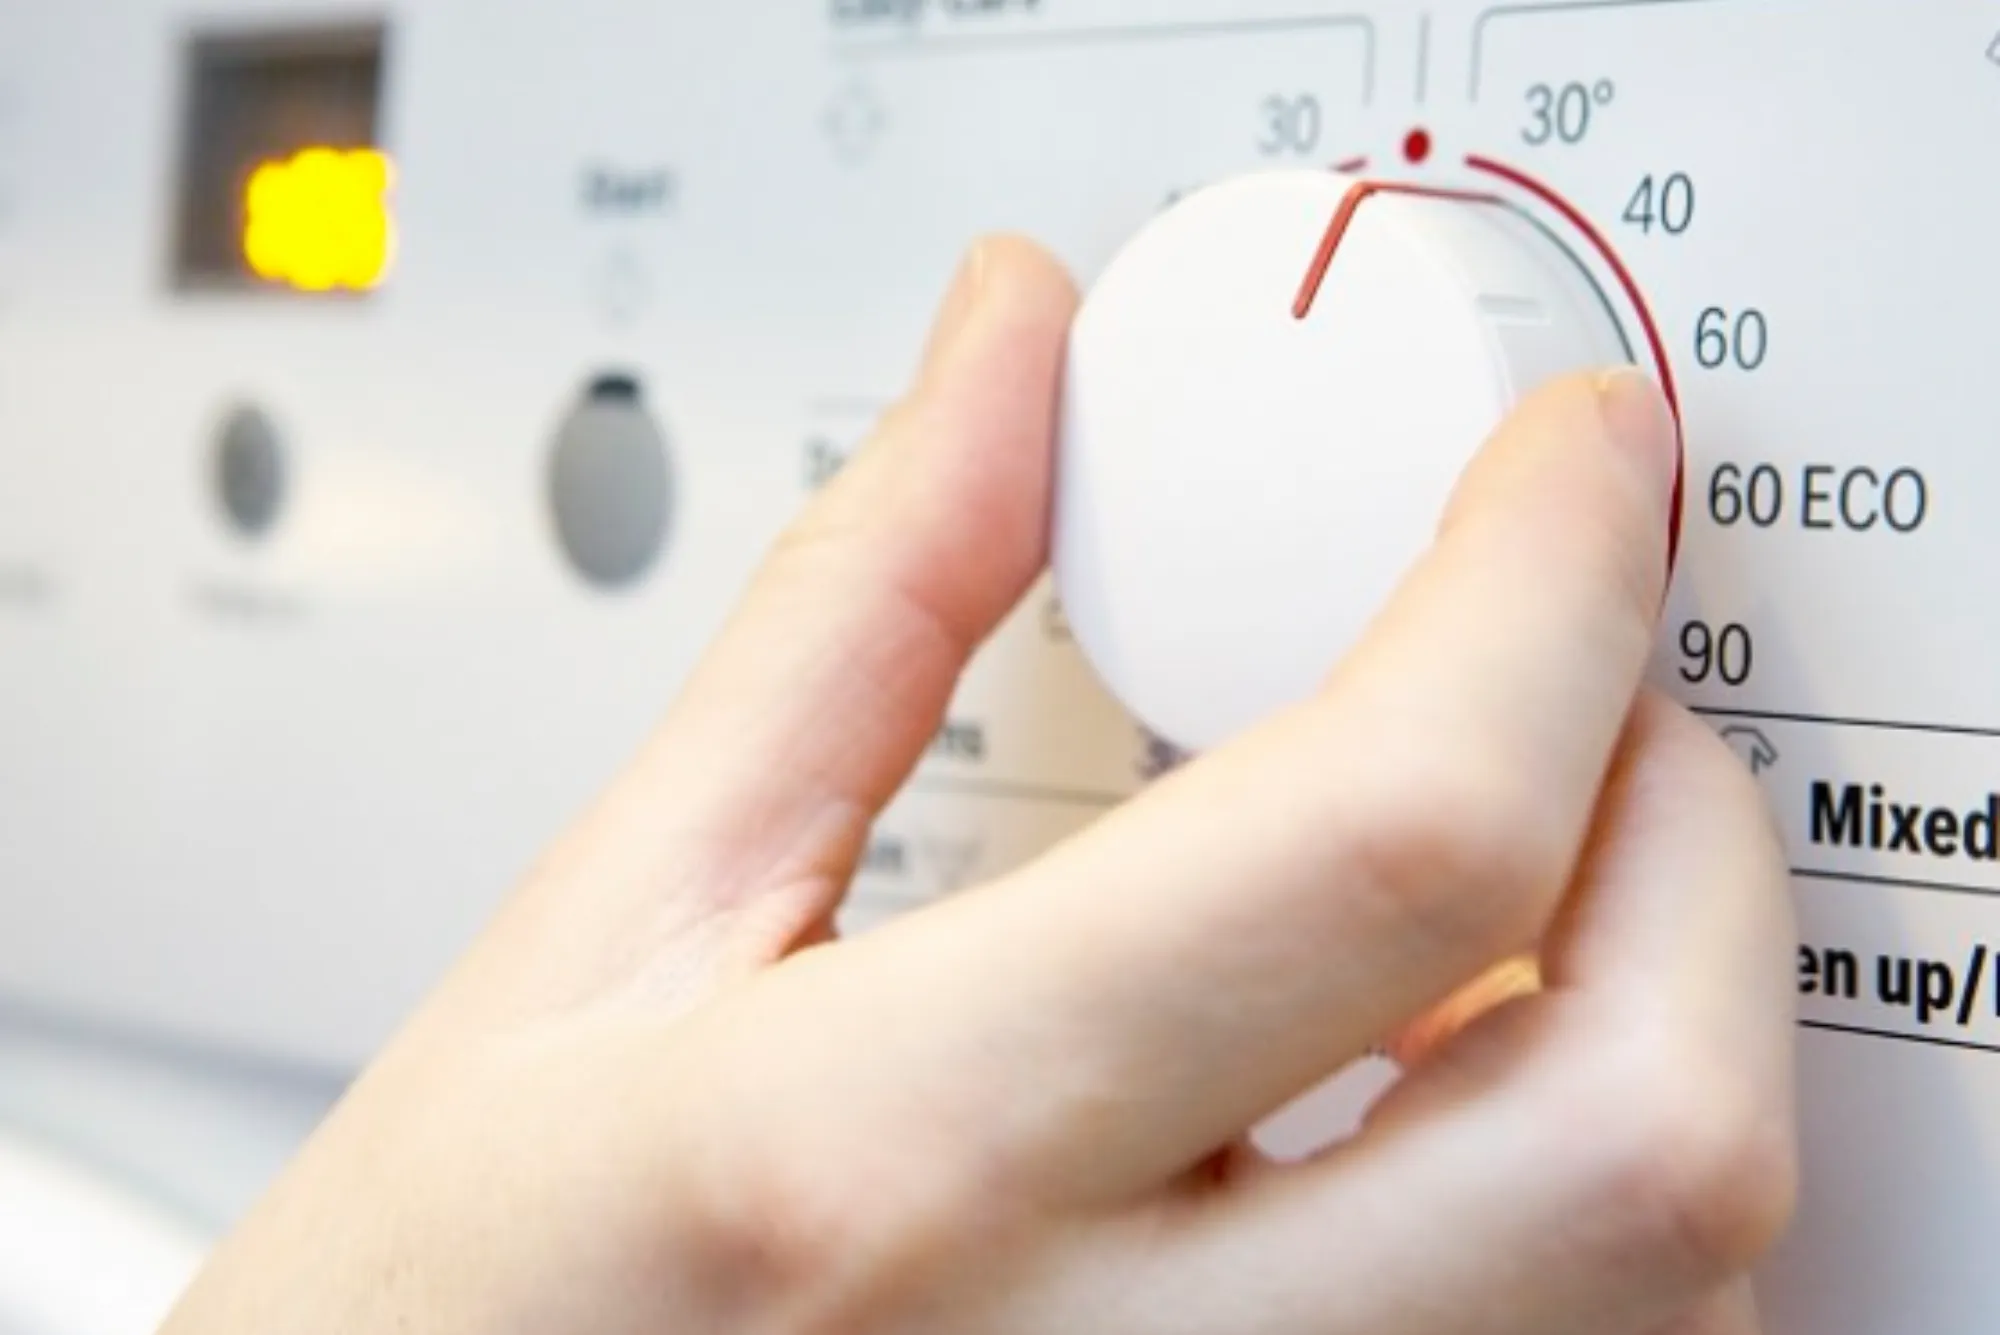 Maintaining a consistent water temperature in your washer